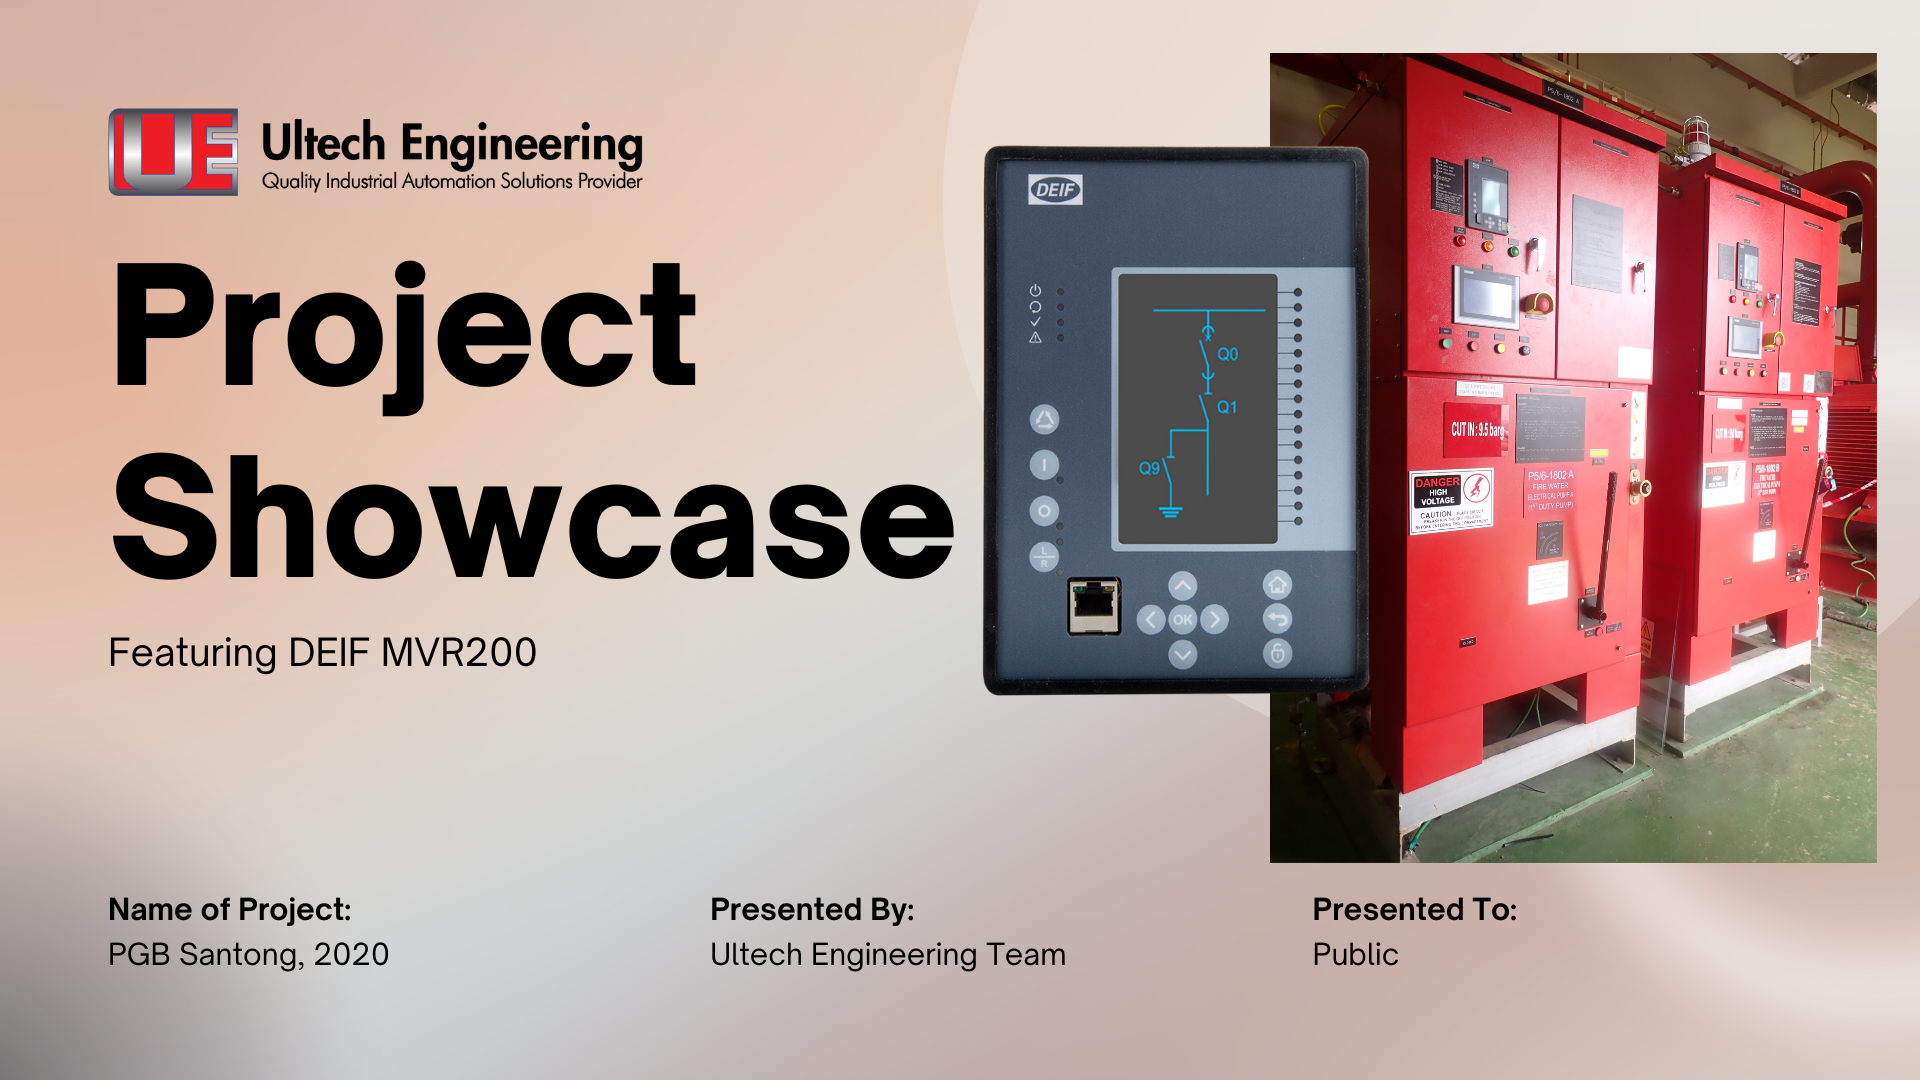 Ultech's Cutting-Edge Project Showcase with DEIF MVR200 Medium Voltage Relay